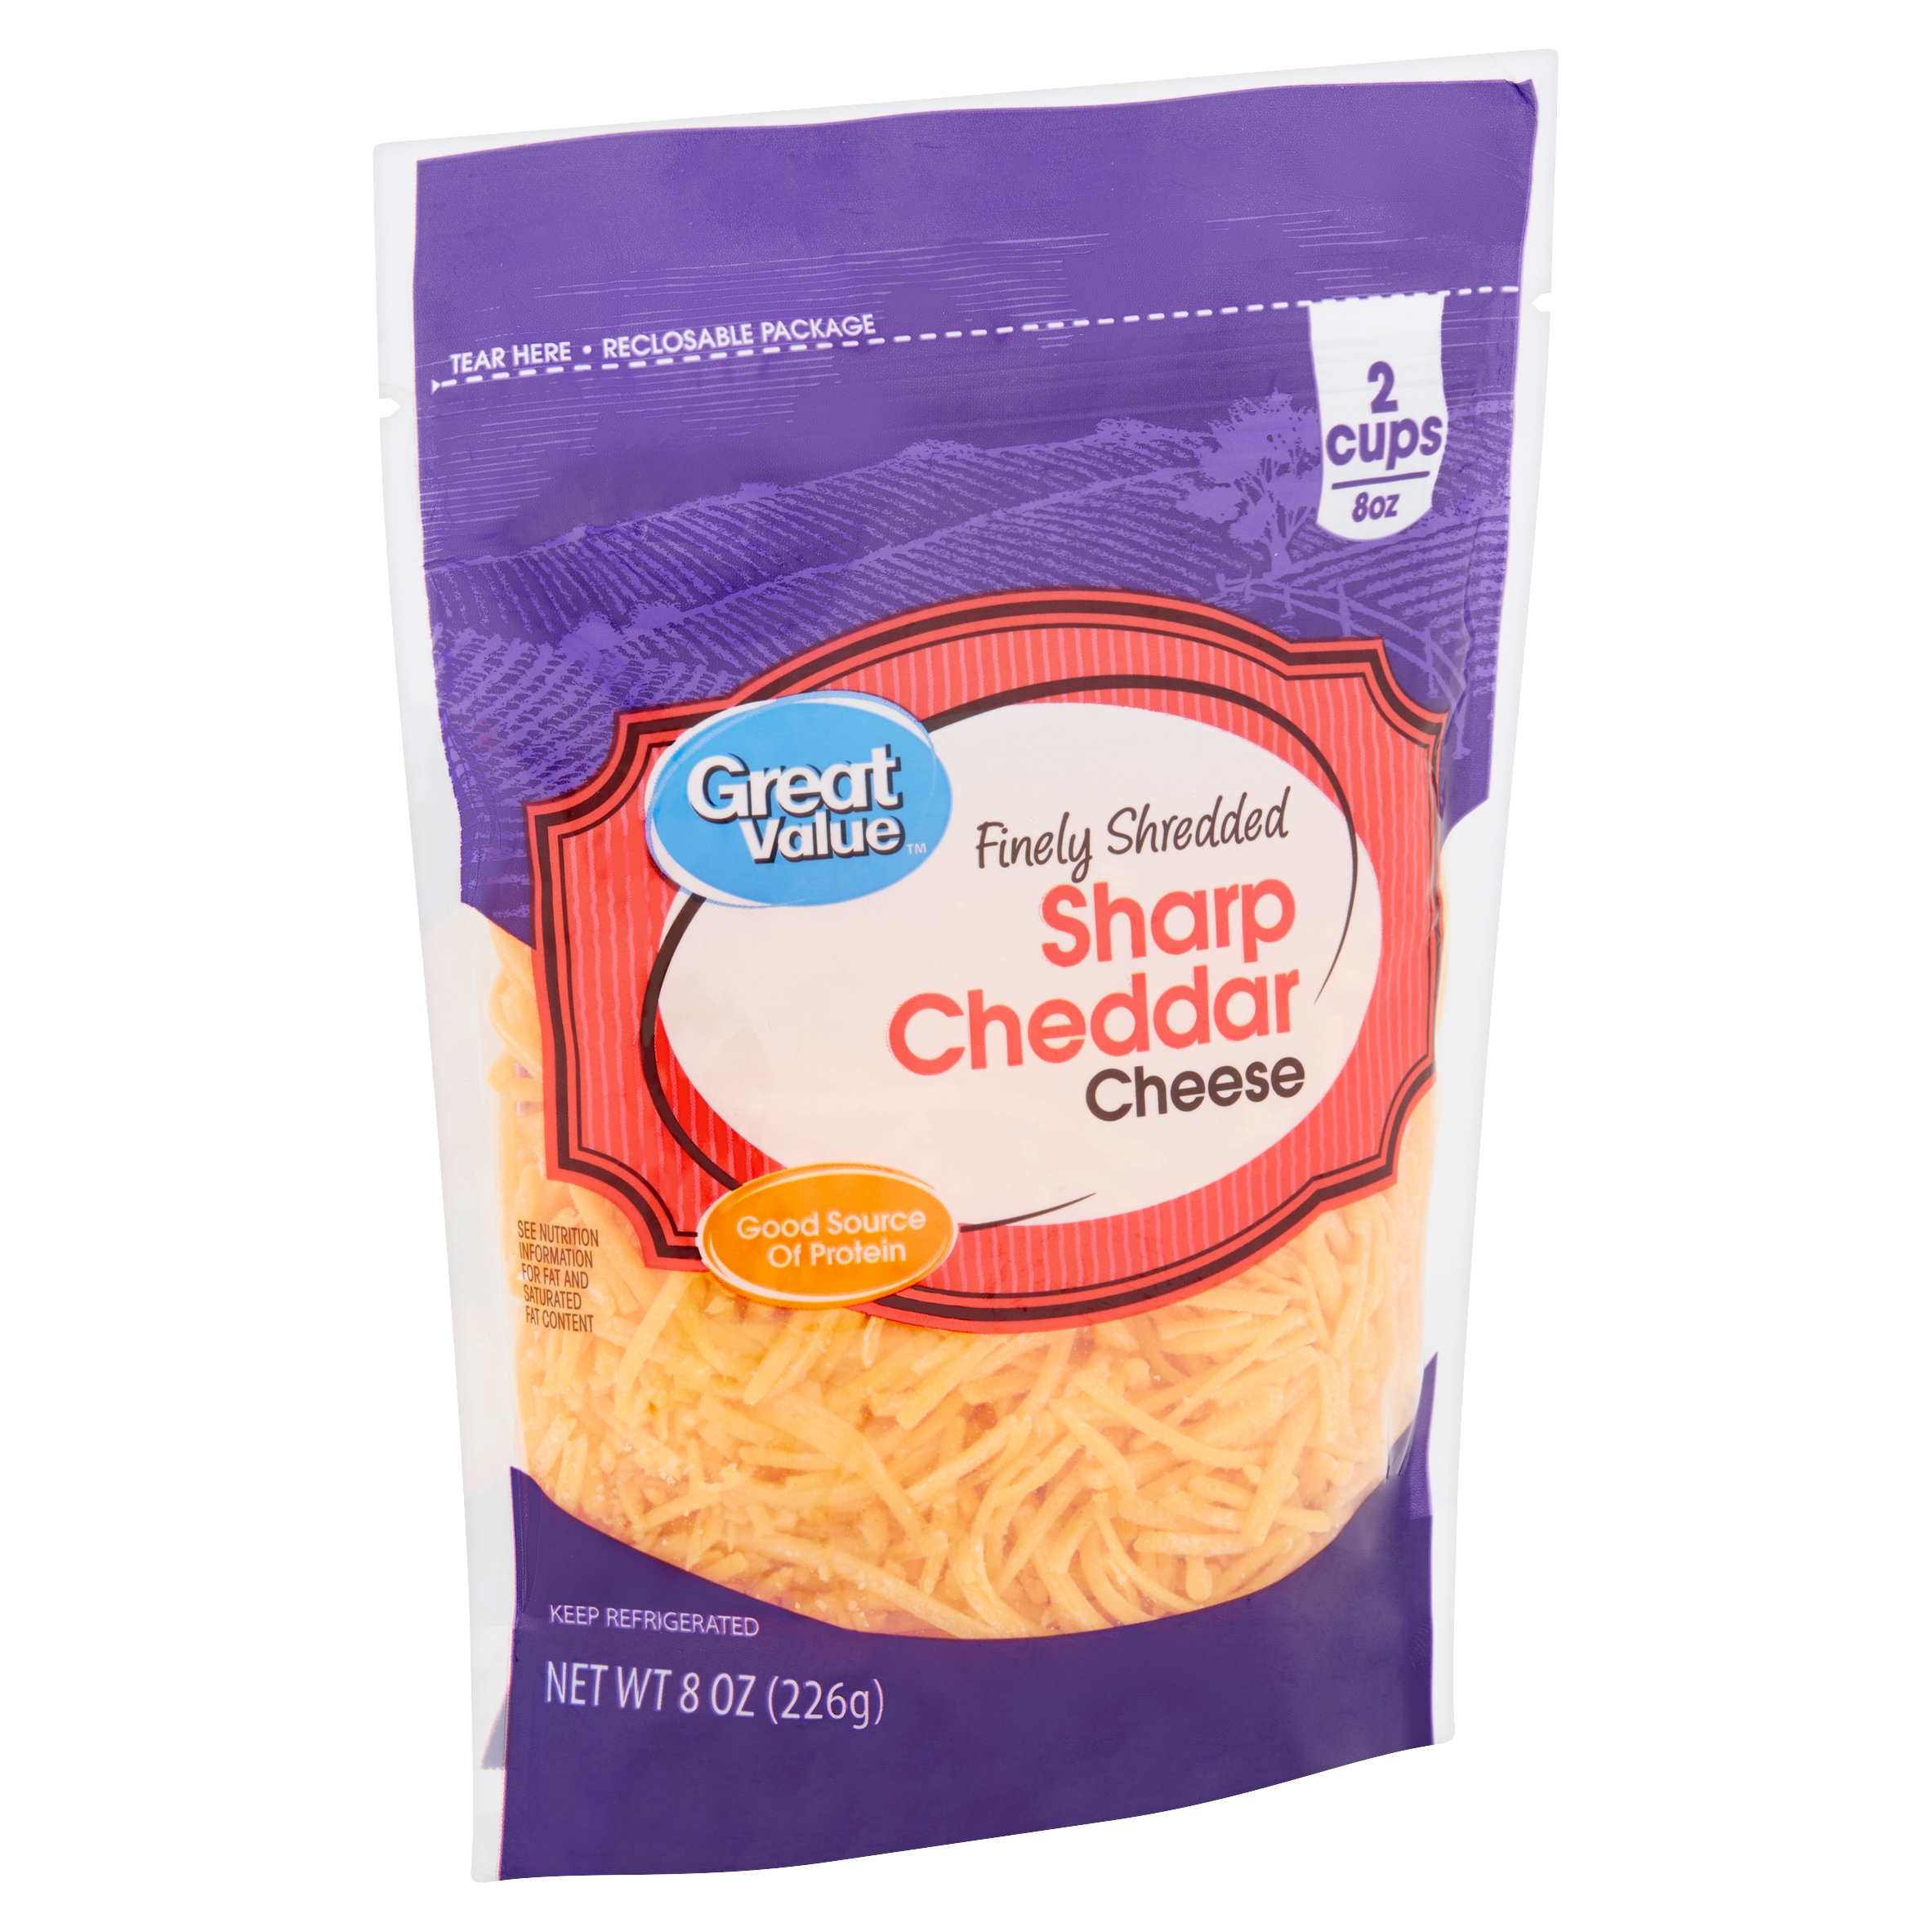 Great Value Finely Shredded Sharp Cheddar Cheese, 8 Oz Image